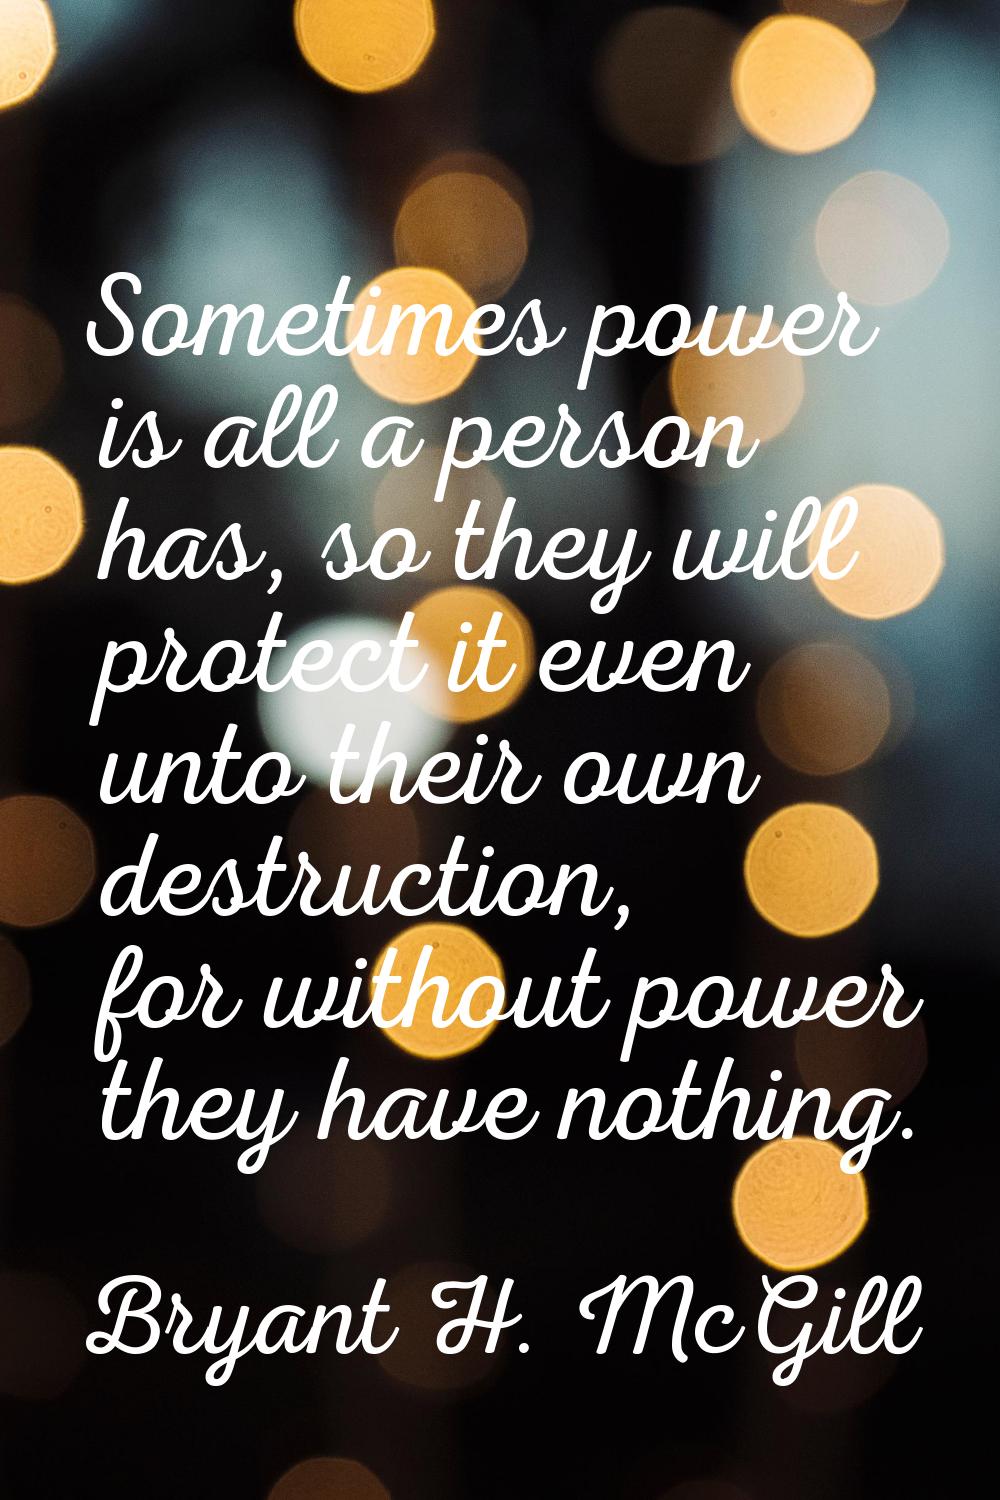 Sometimes power is all a person has, so they will protect it even unto their own destruction, for w